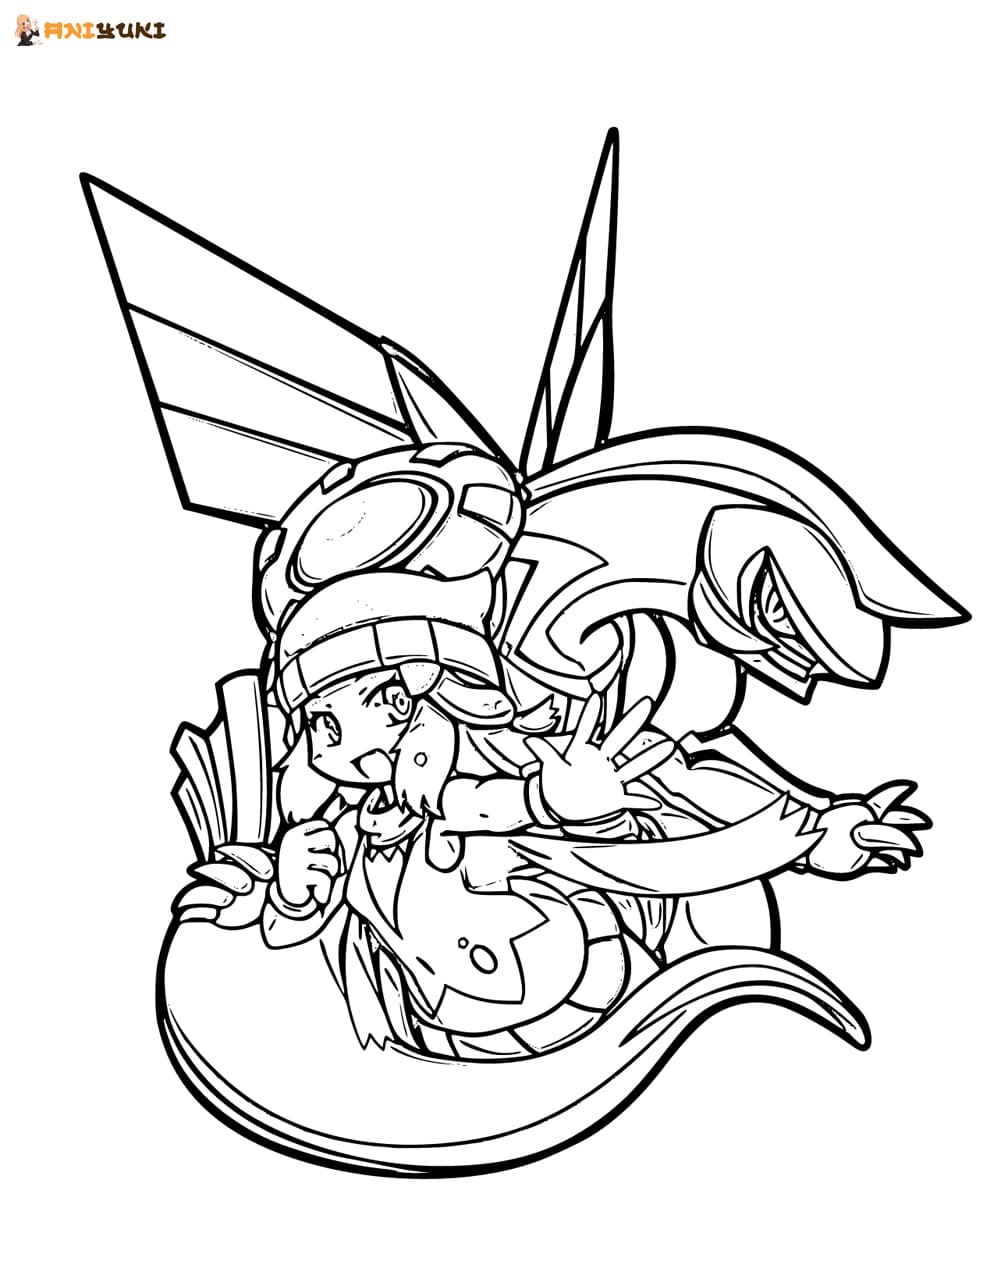 Palkia coloring pages